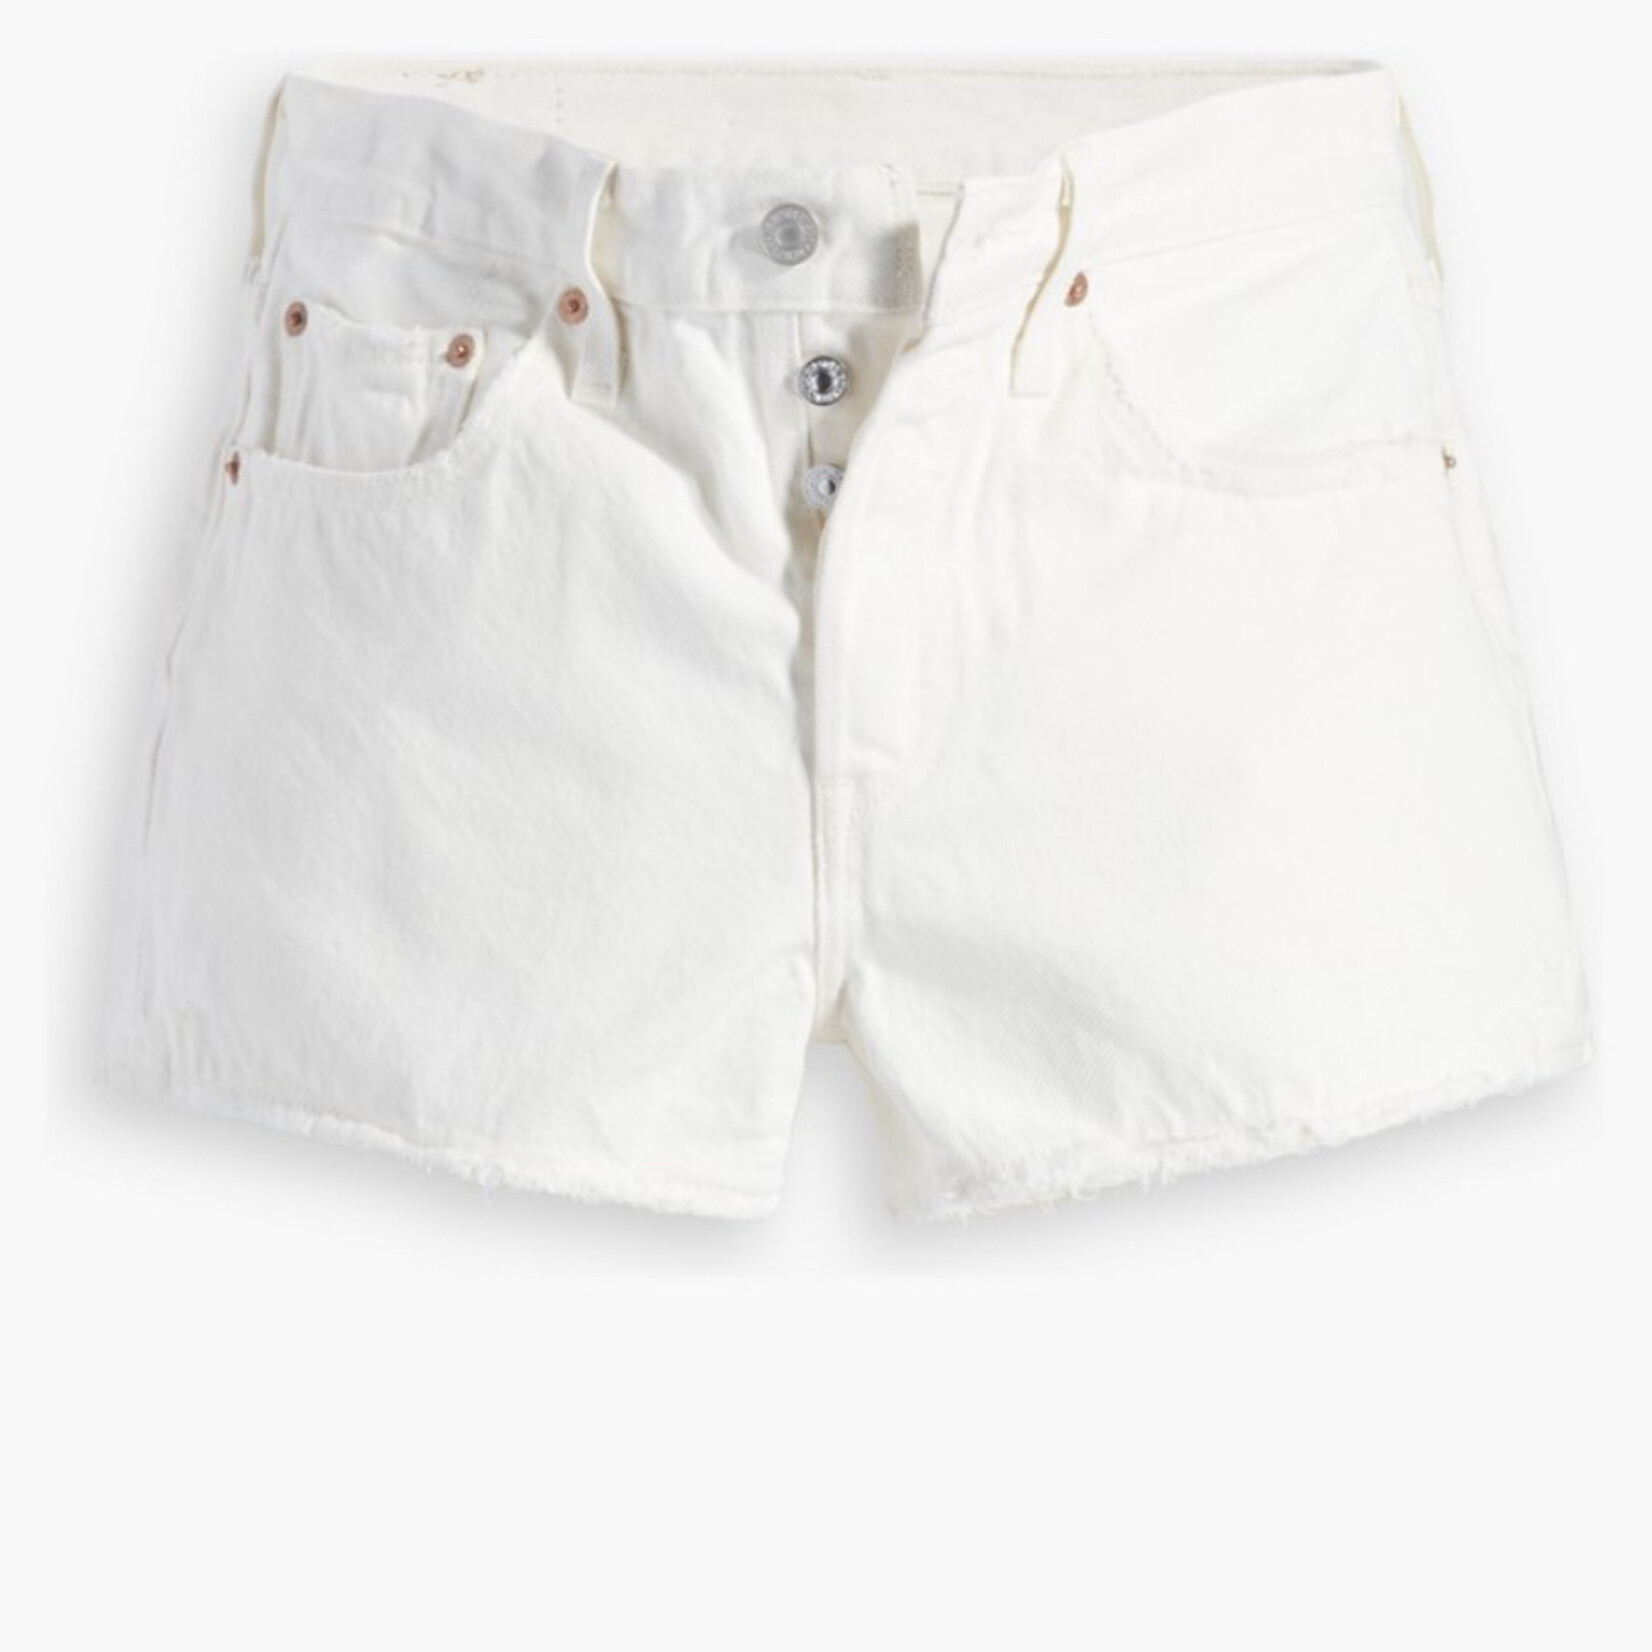 Levi's 501 Oroginal Short-The Clean Finish